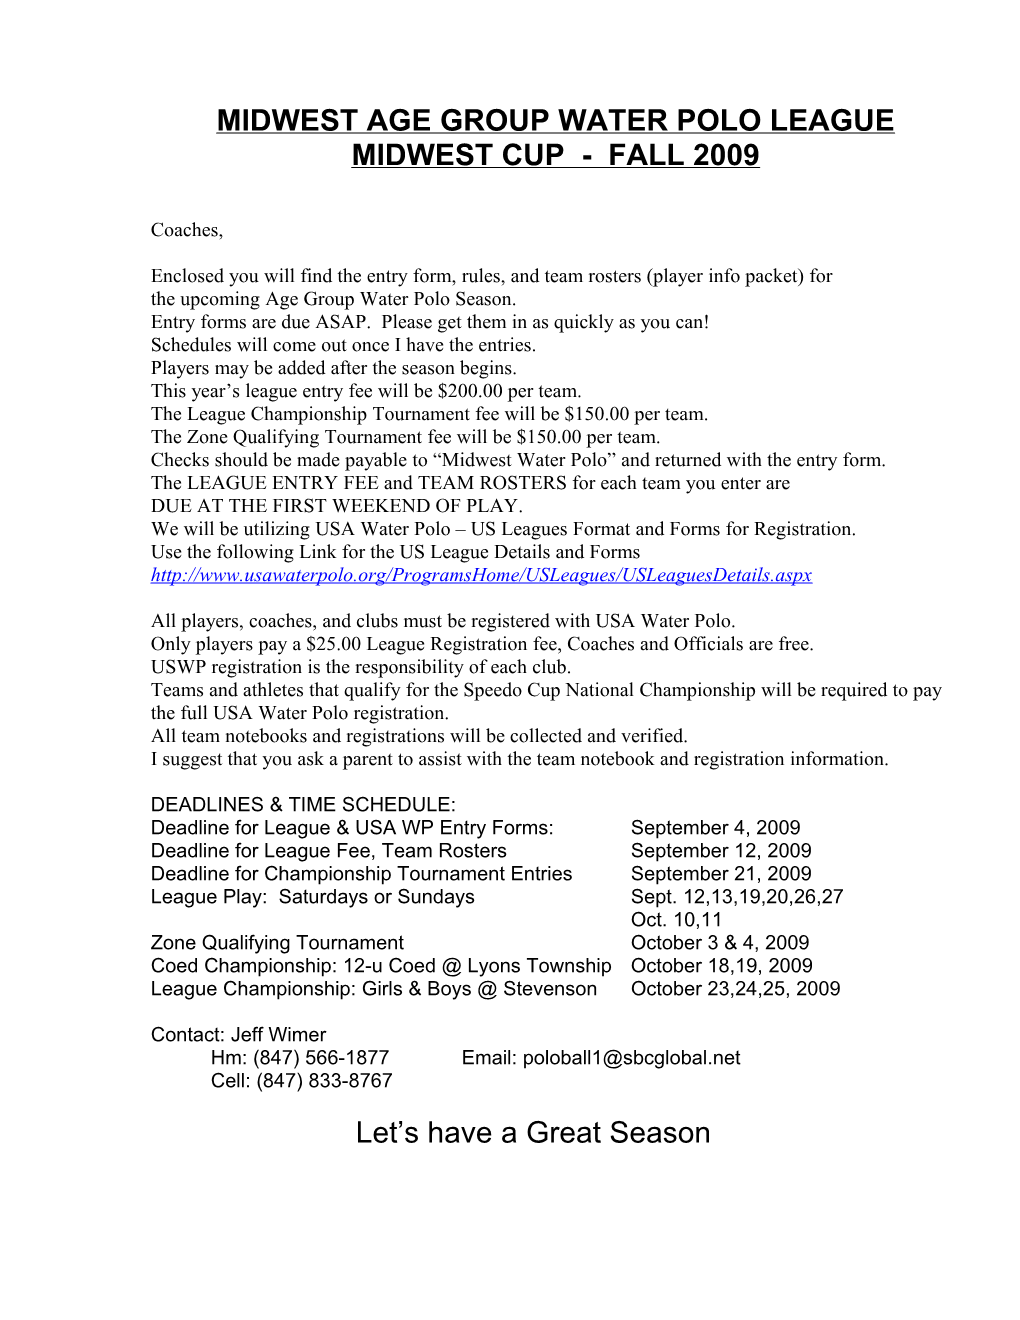 Midwest Age Group Water Polo League